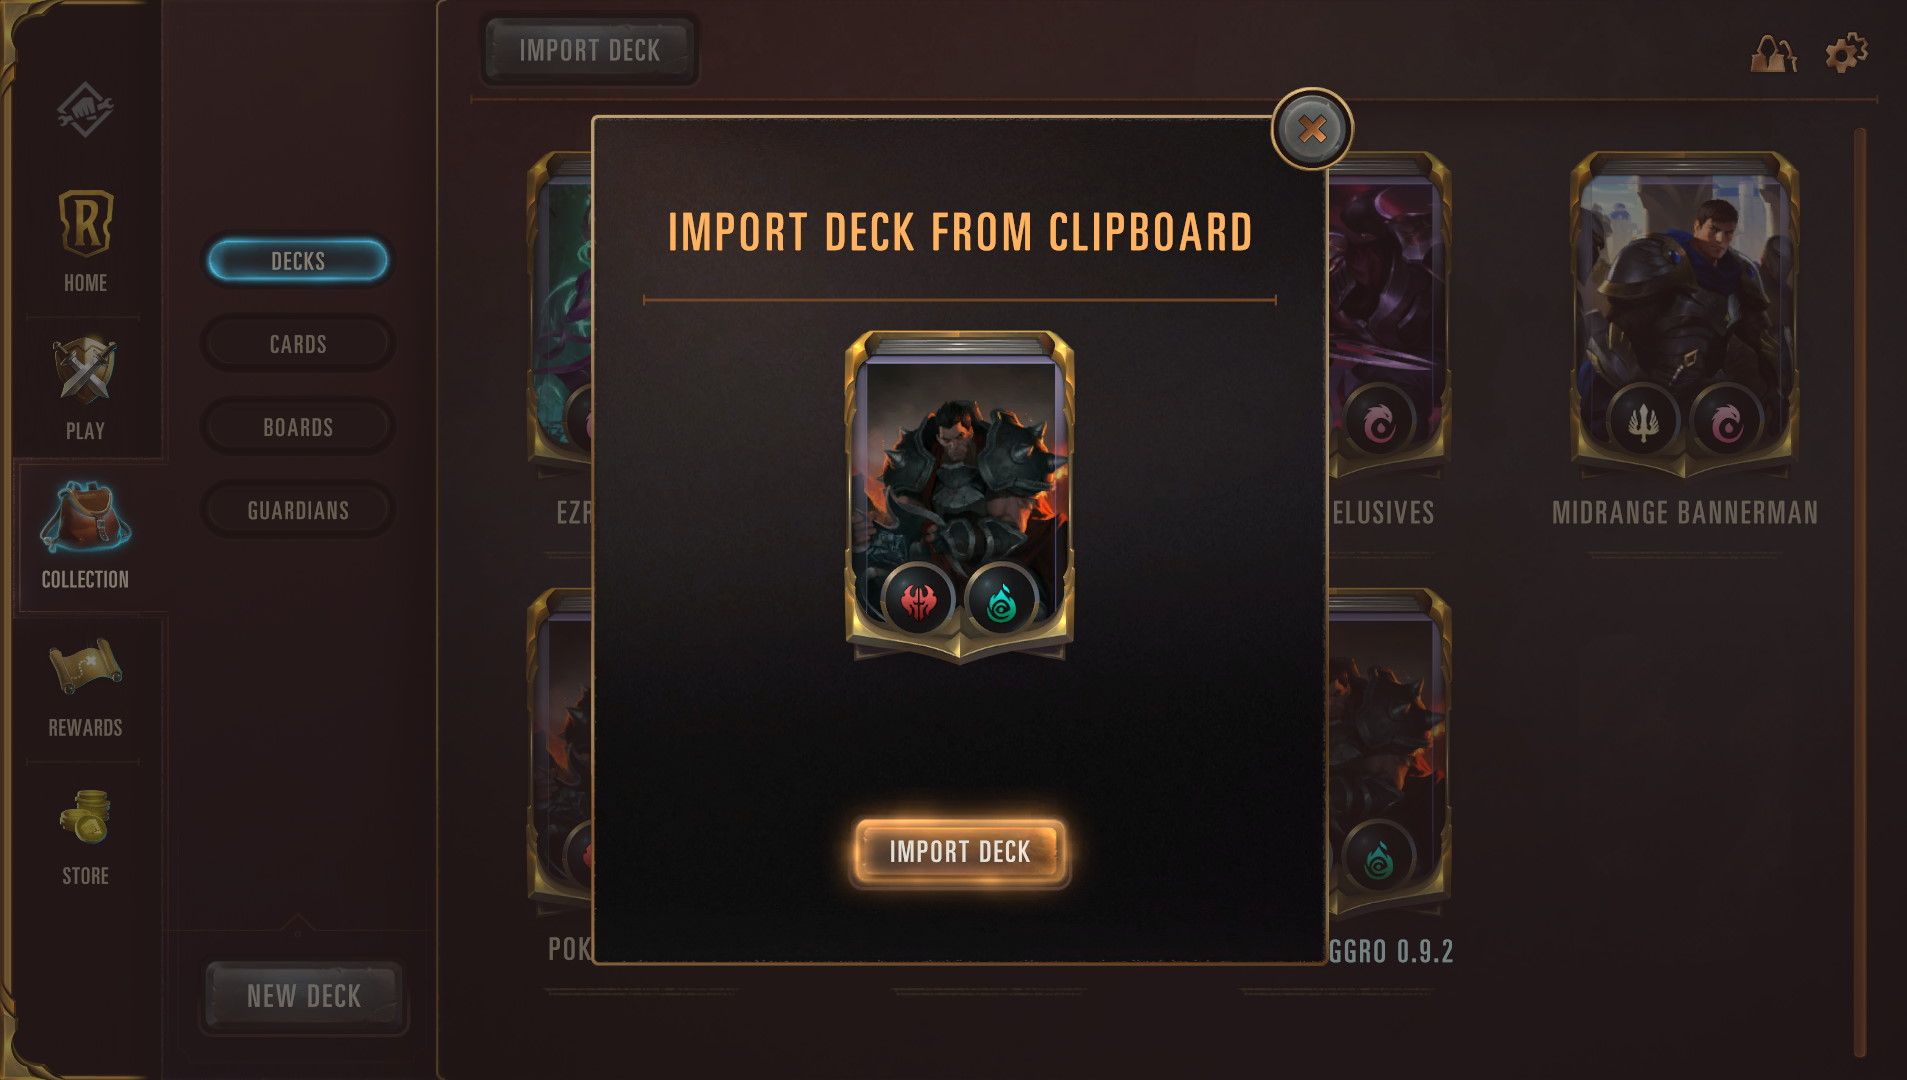 Importing a deck from clipboard in Legends of Runeterra